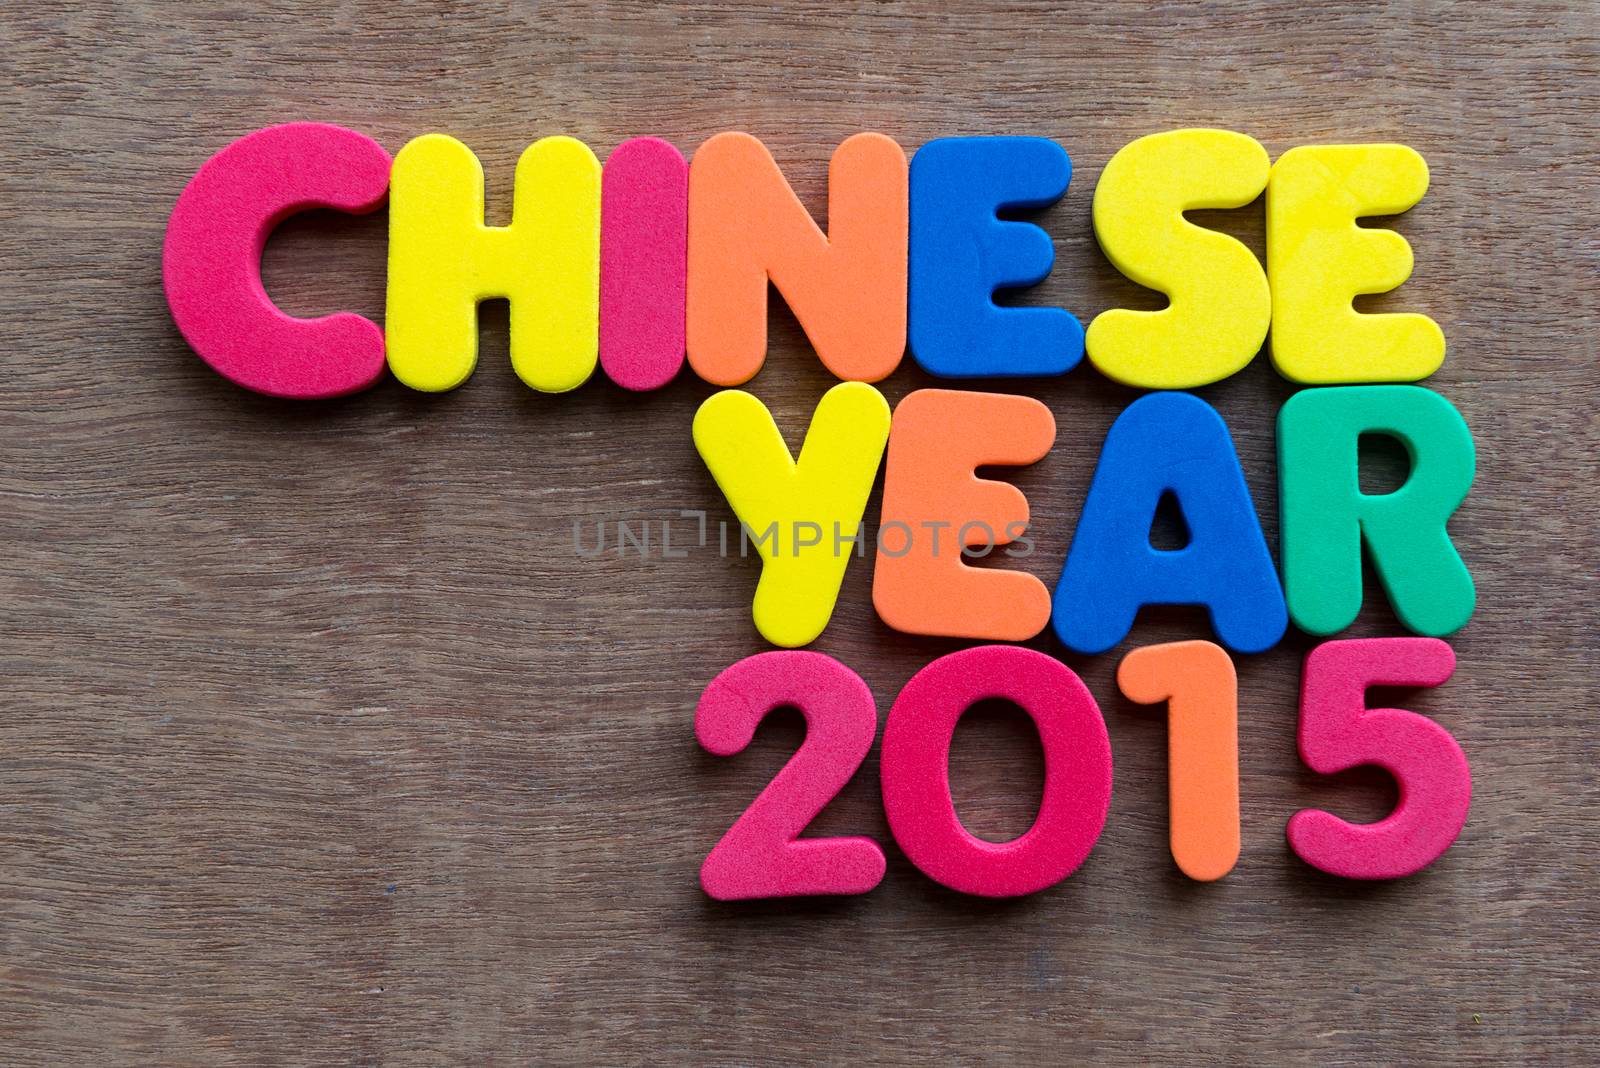 chinese new year words in wood background by sohel.parvez@hotmail.com